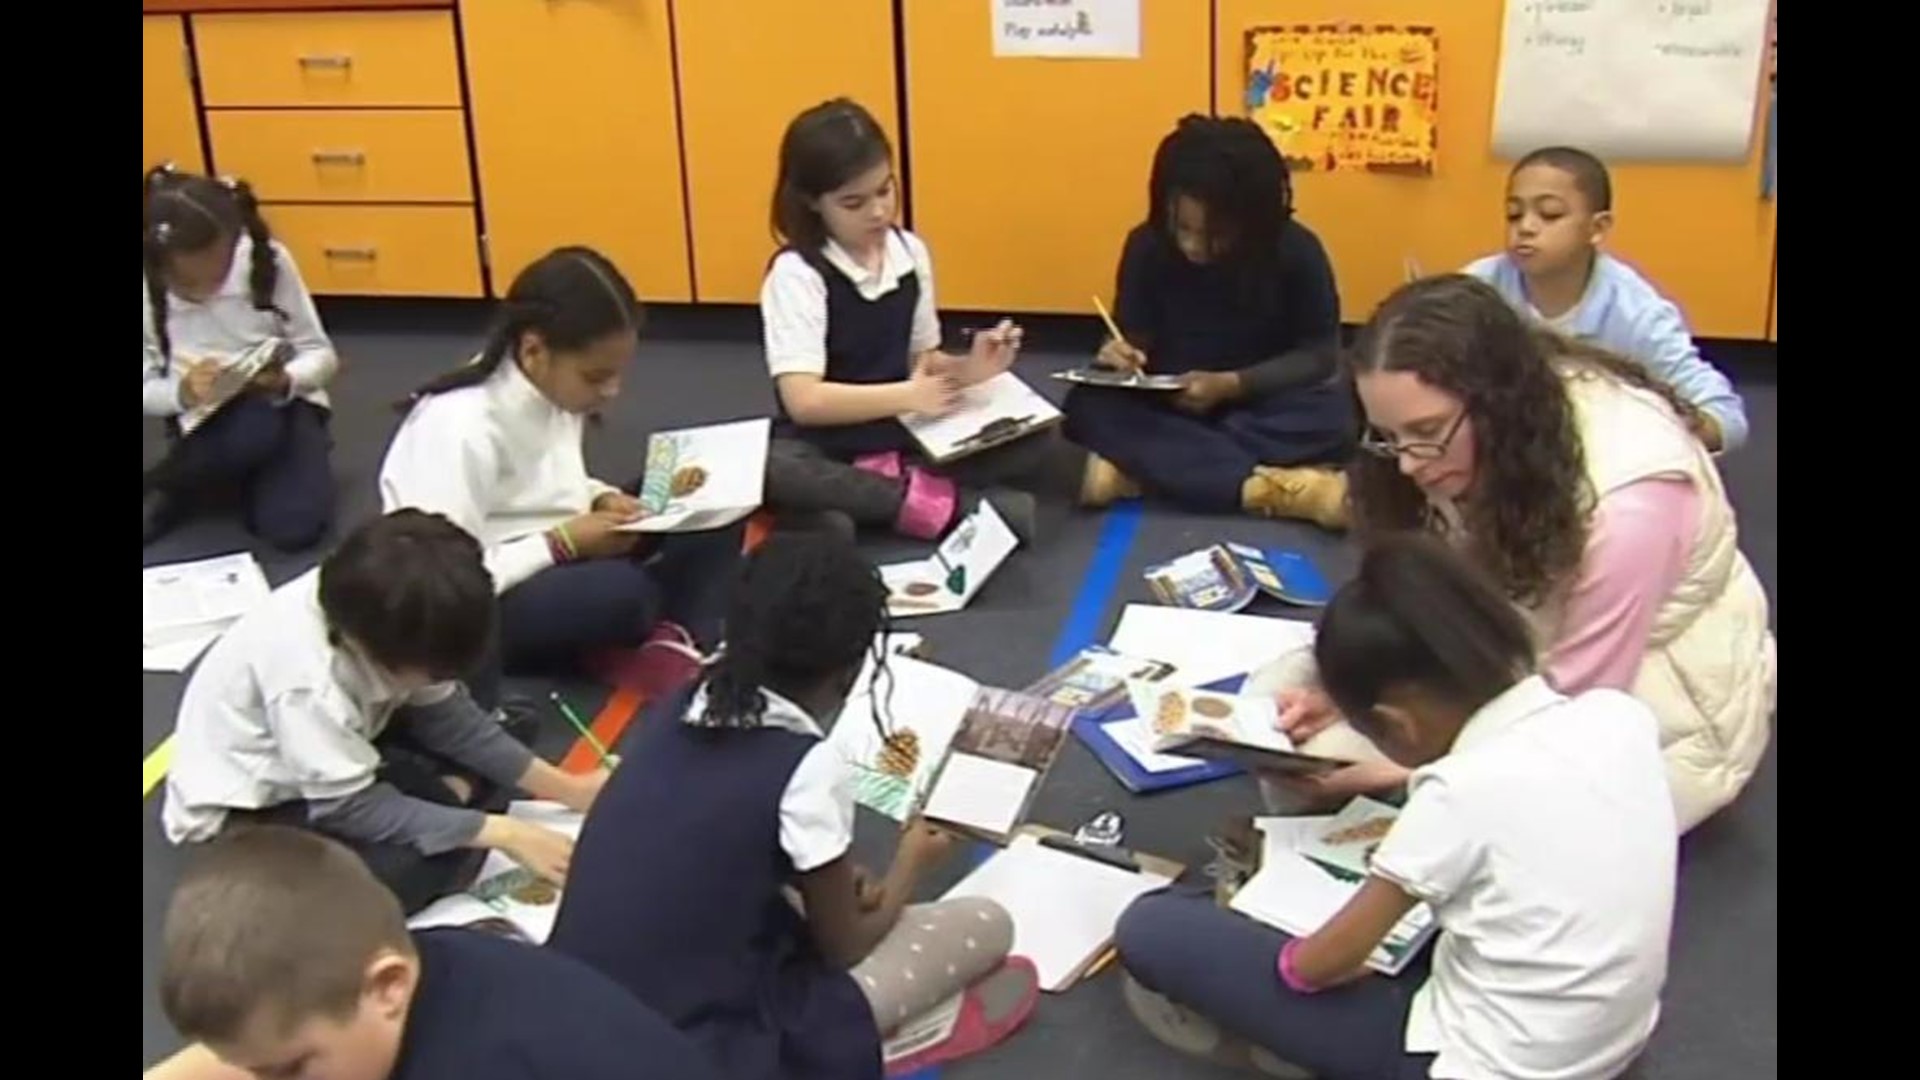 Parents Mobilize To Change Third Grade Reading Tests